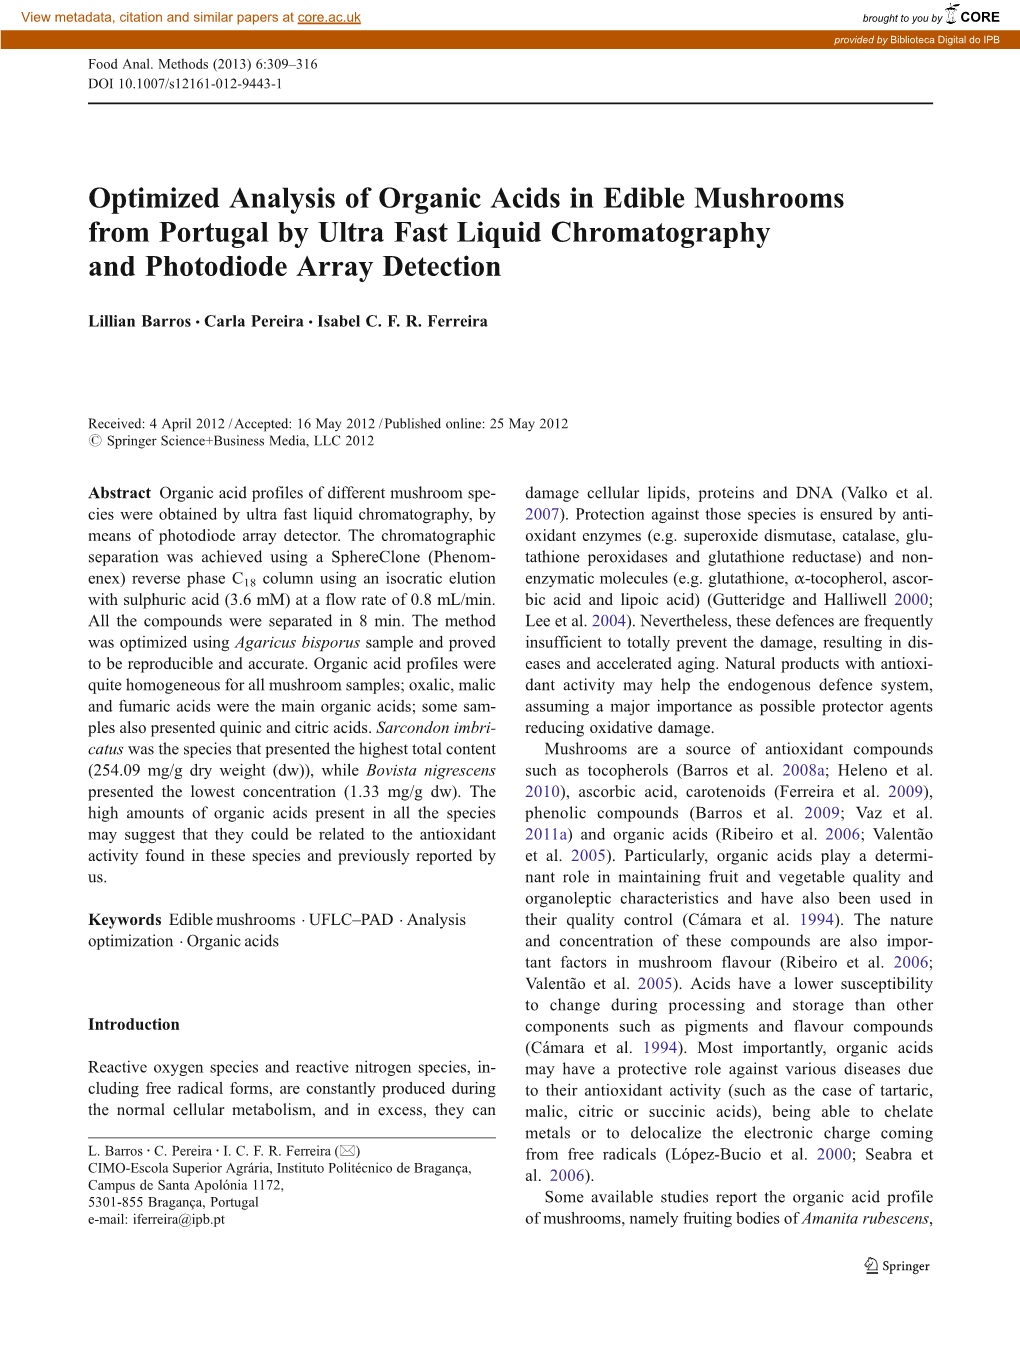 Optimized Analysis of Organic Acids in Edible Mushrooms from Portugal by Ultra Fast Liquid Chromatography and Photodiode Array Detection